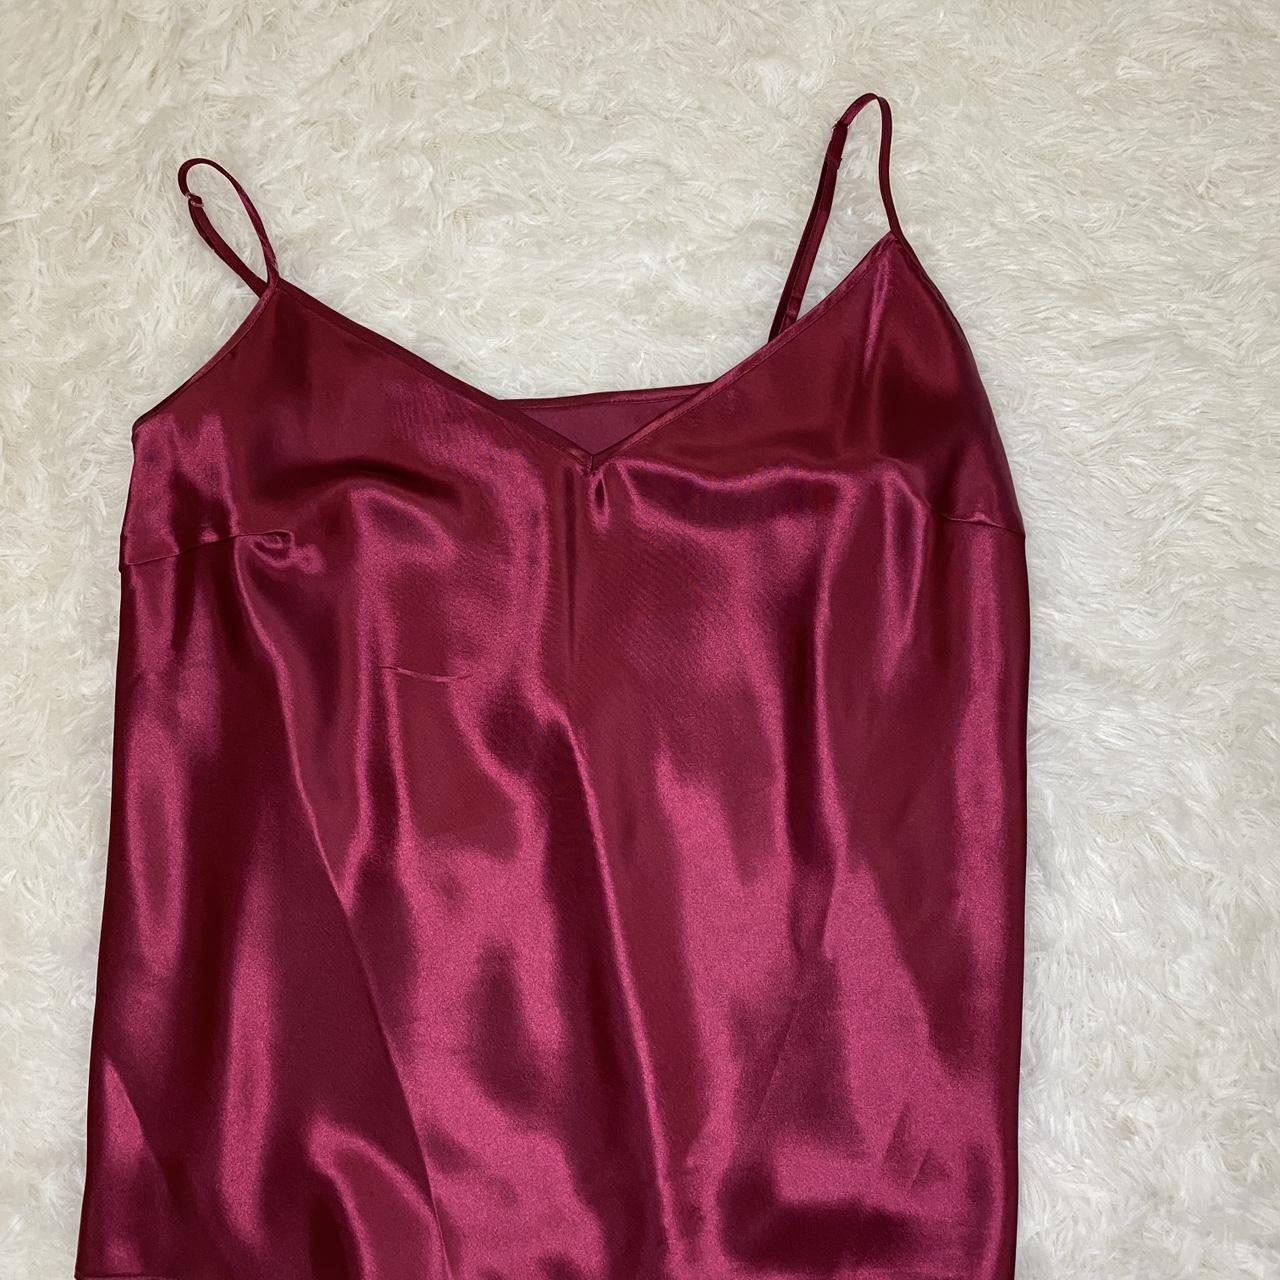 ️Maroon red silky camisole, light and thin top, 💋no... - Depop